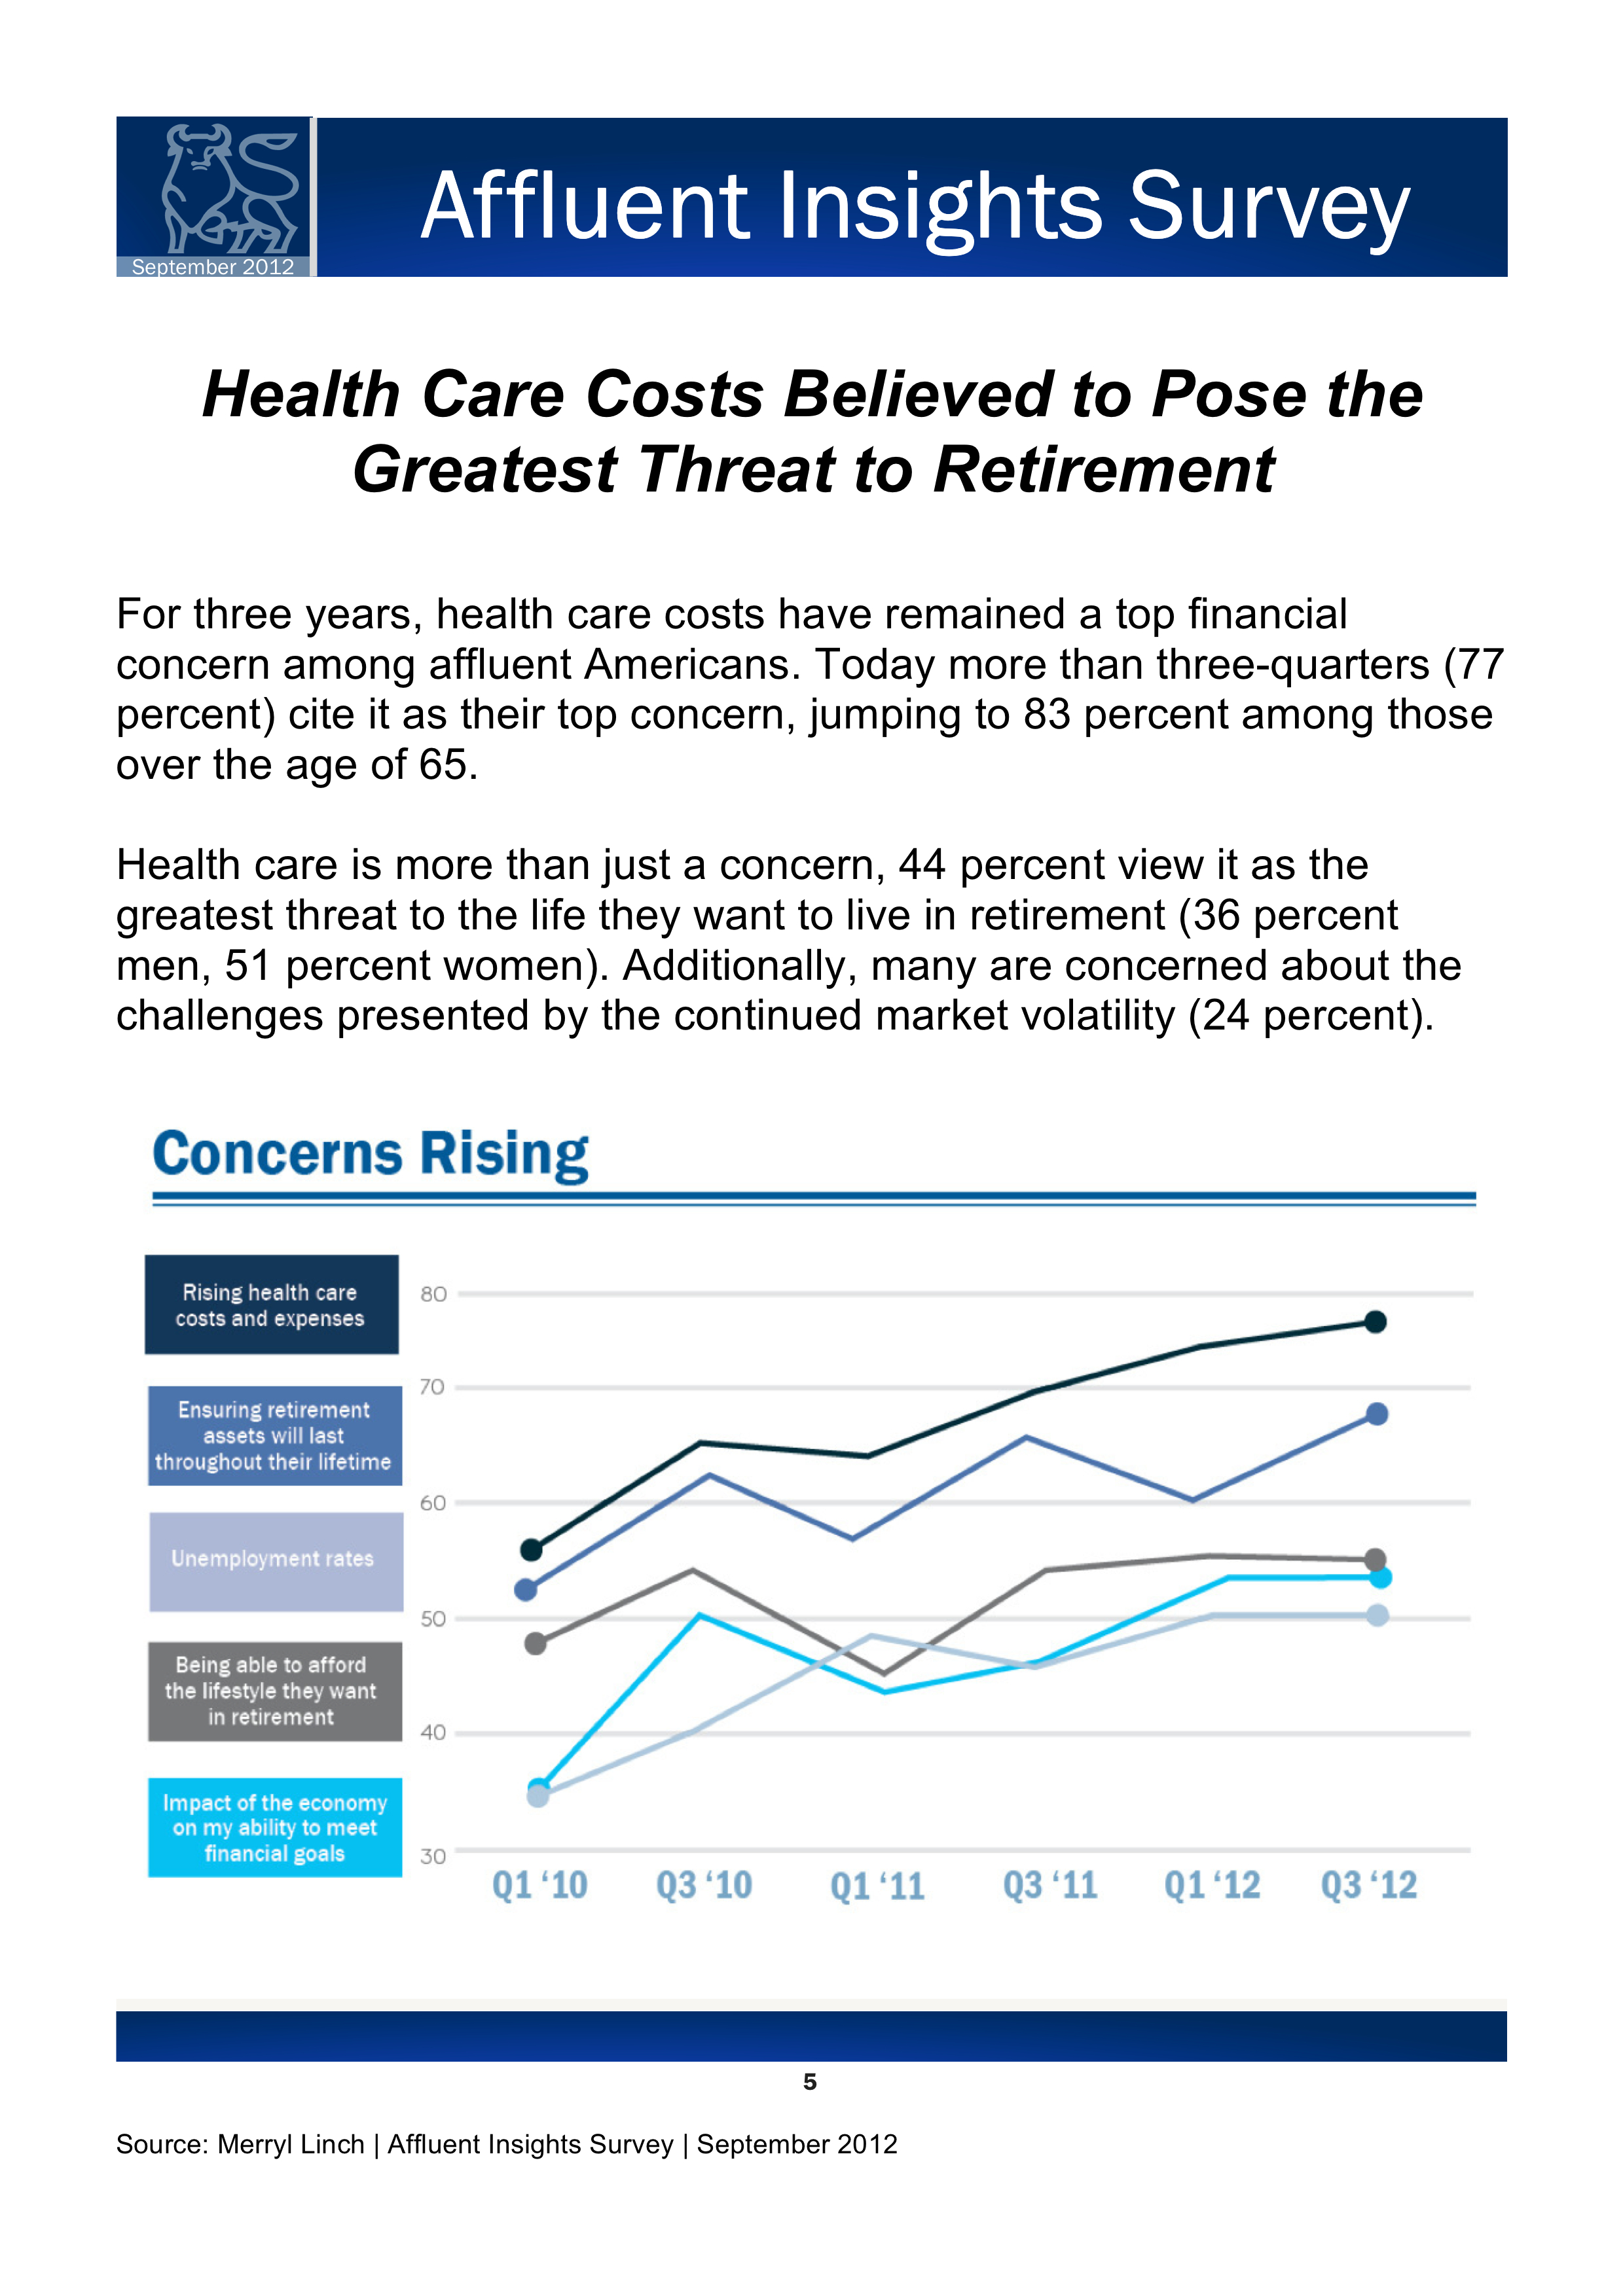 Health Care Costs Believed to Pose the Greatest Threat to Retirement